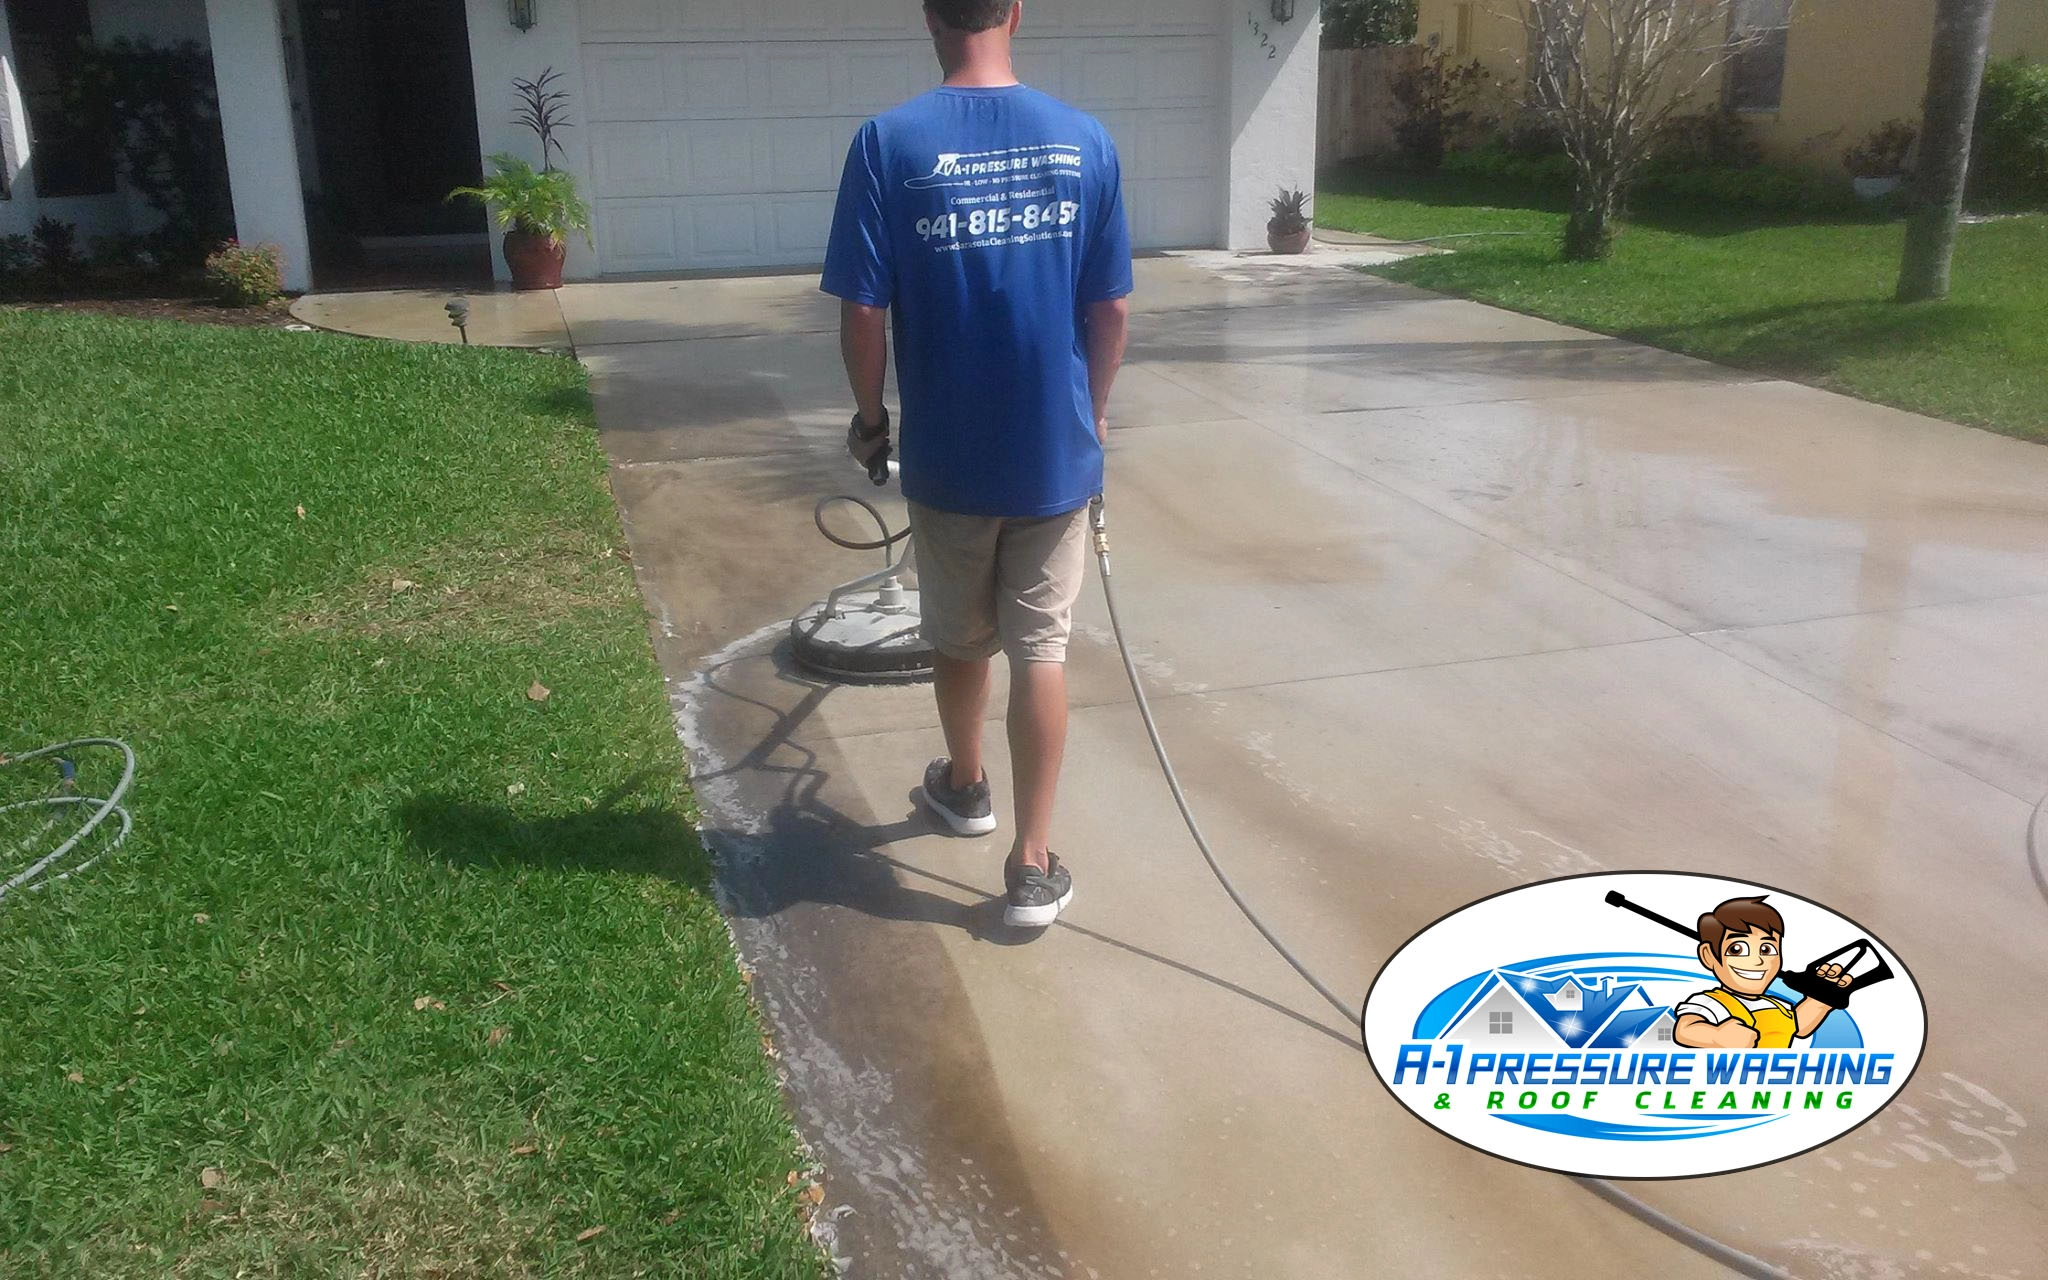 A-1 Pressure Washing & Roof Cleaning | 941-815-8454 